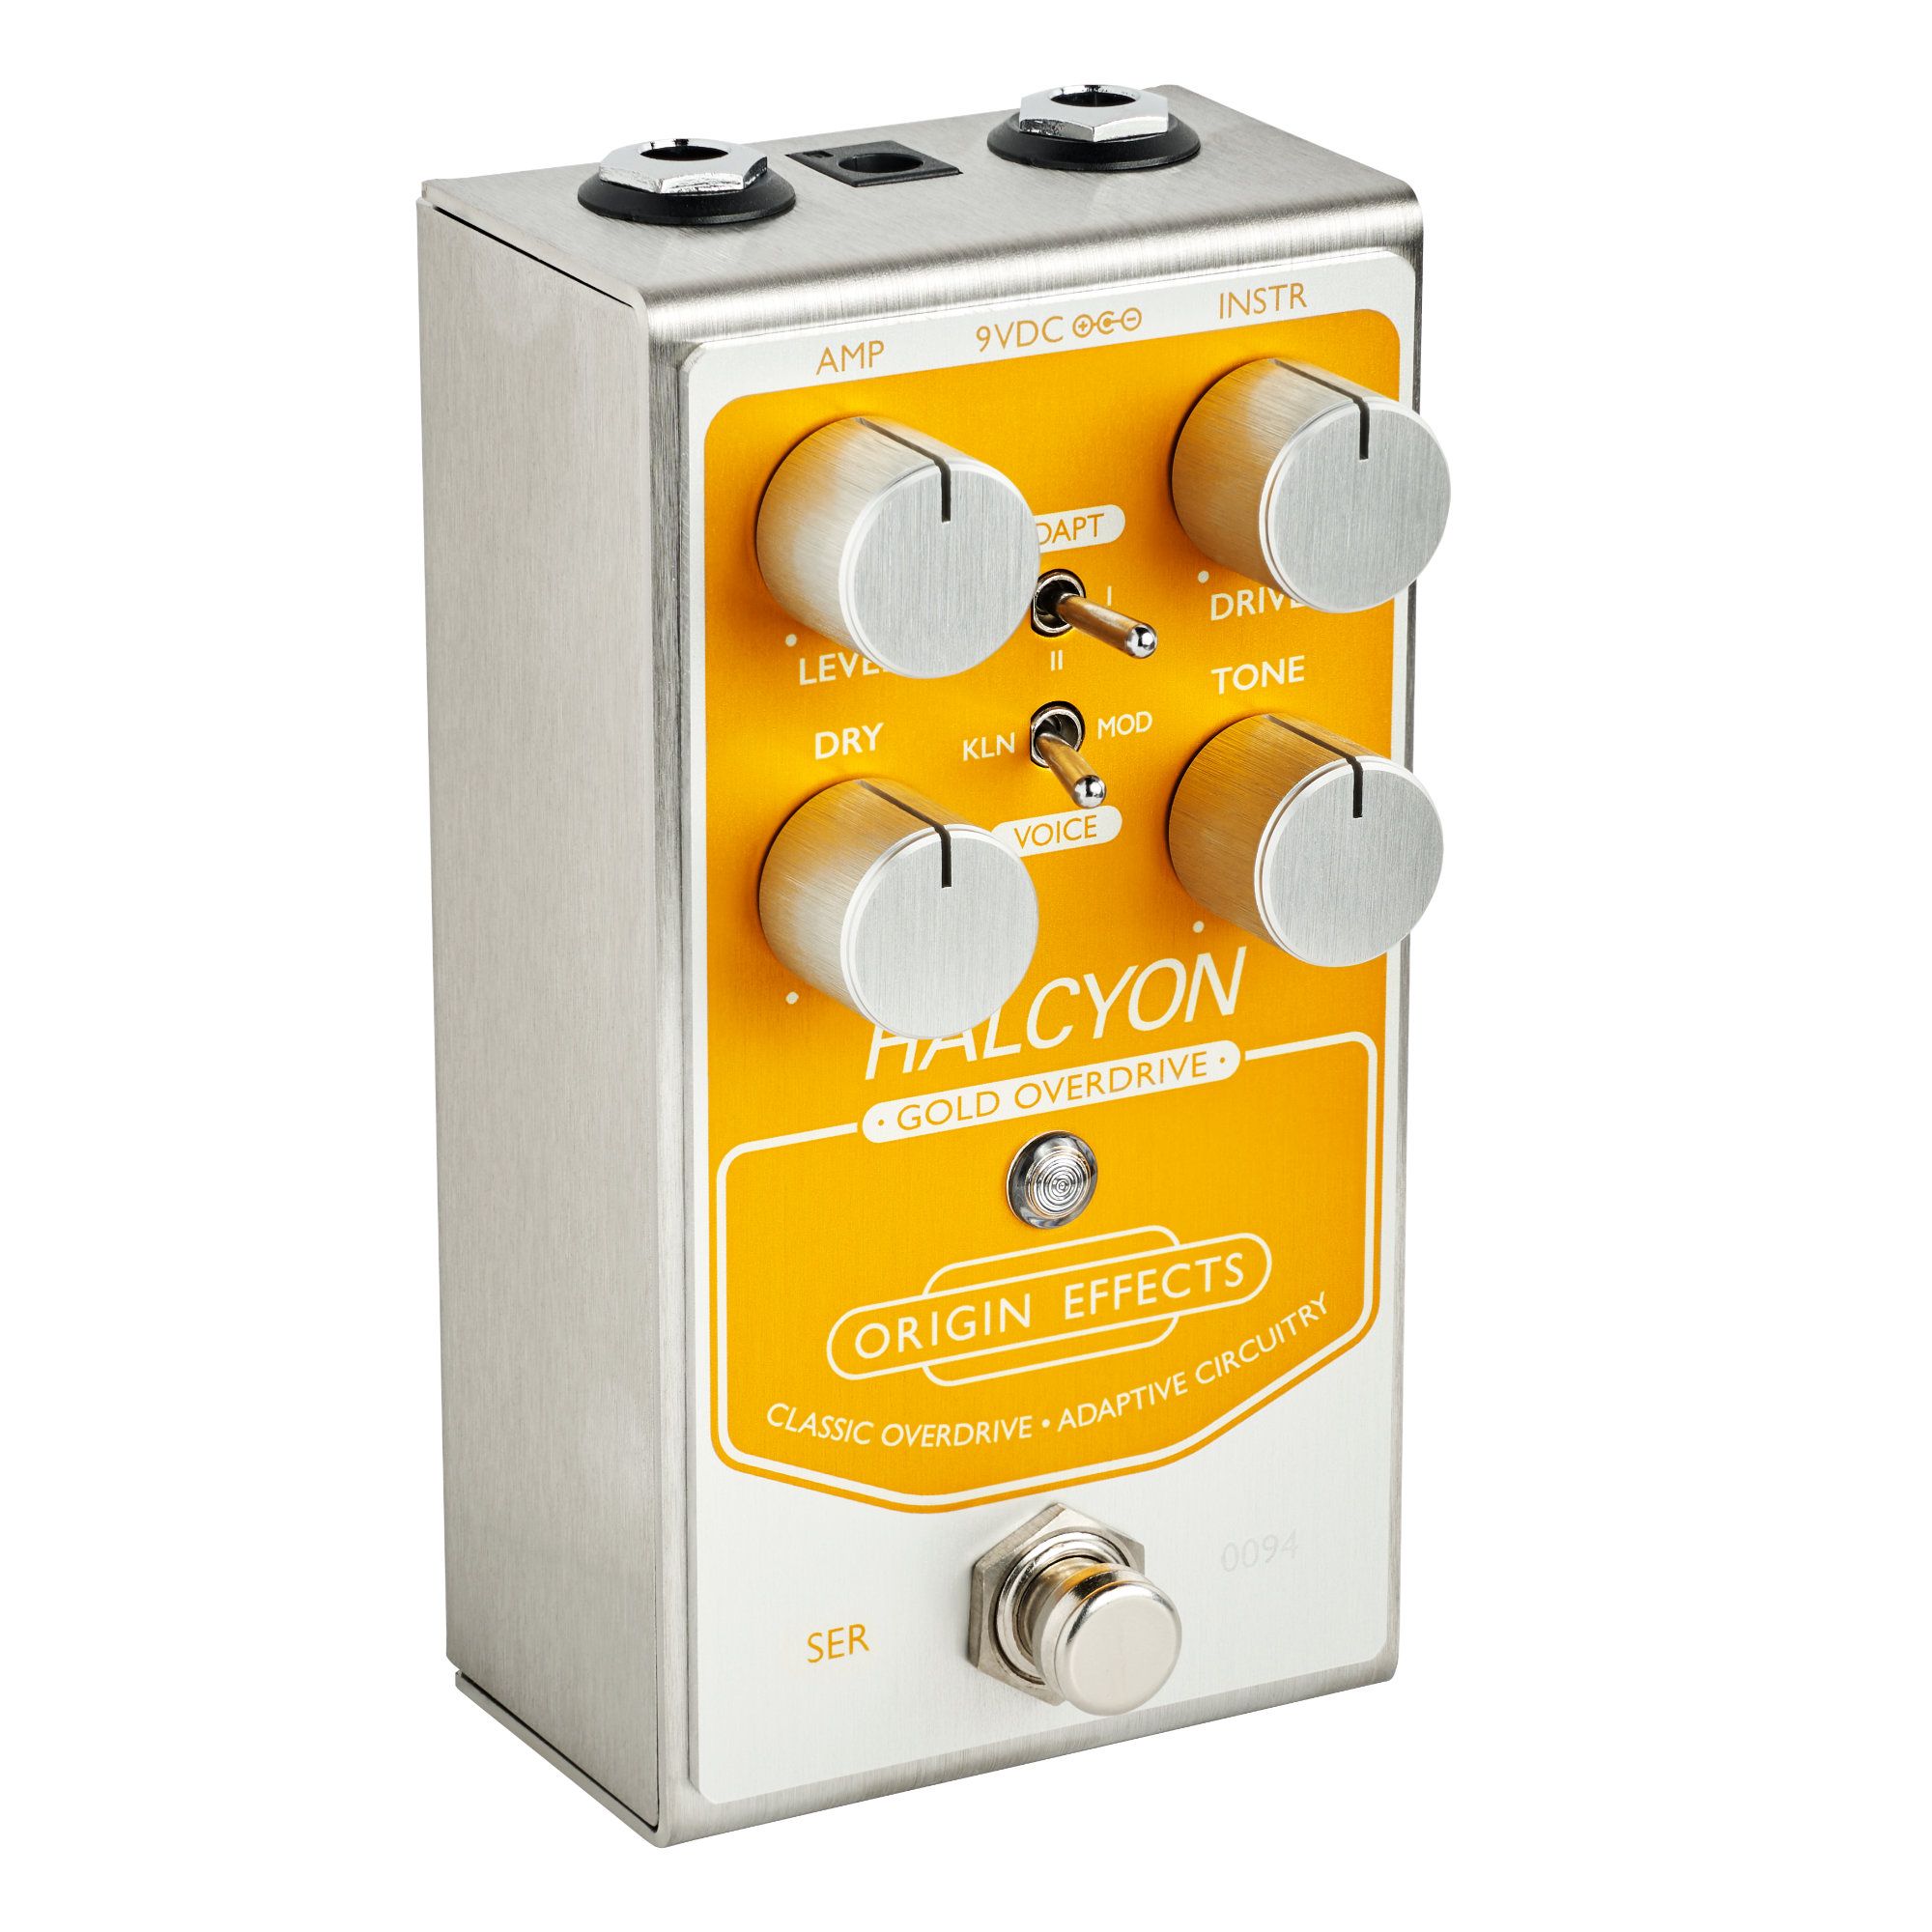 Origin Effects Halcyon Gold Overdrive - Overdrive, distortion & fuzz effect pedal - Variation 2